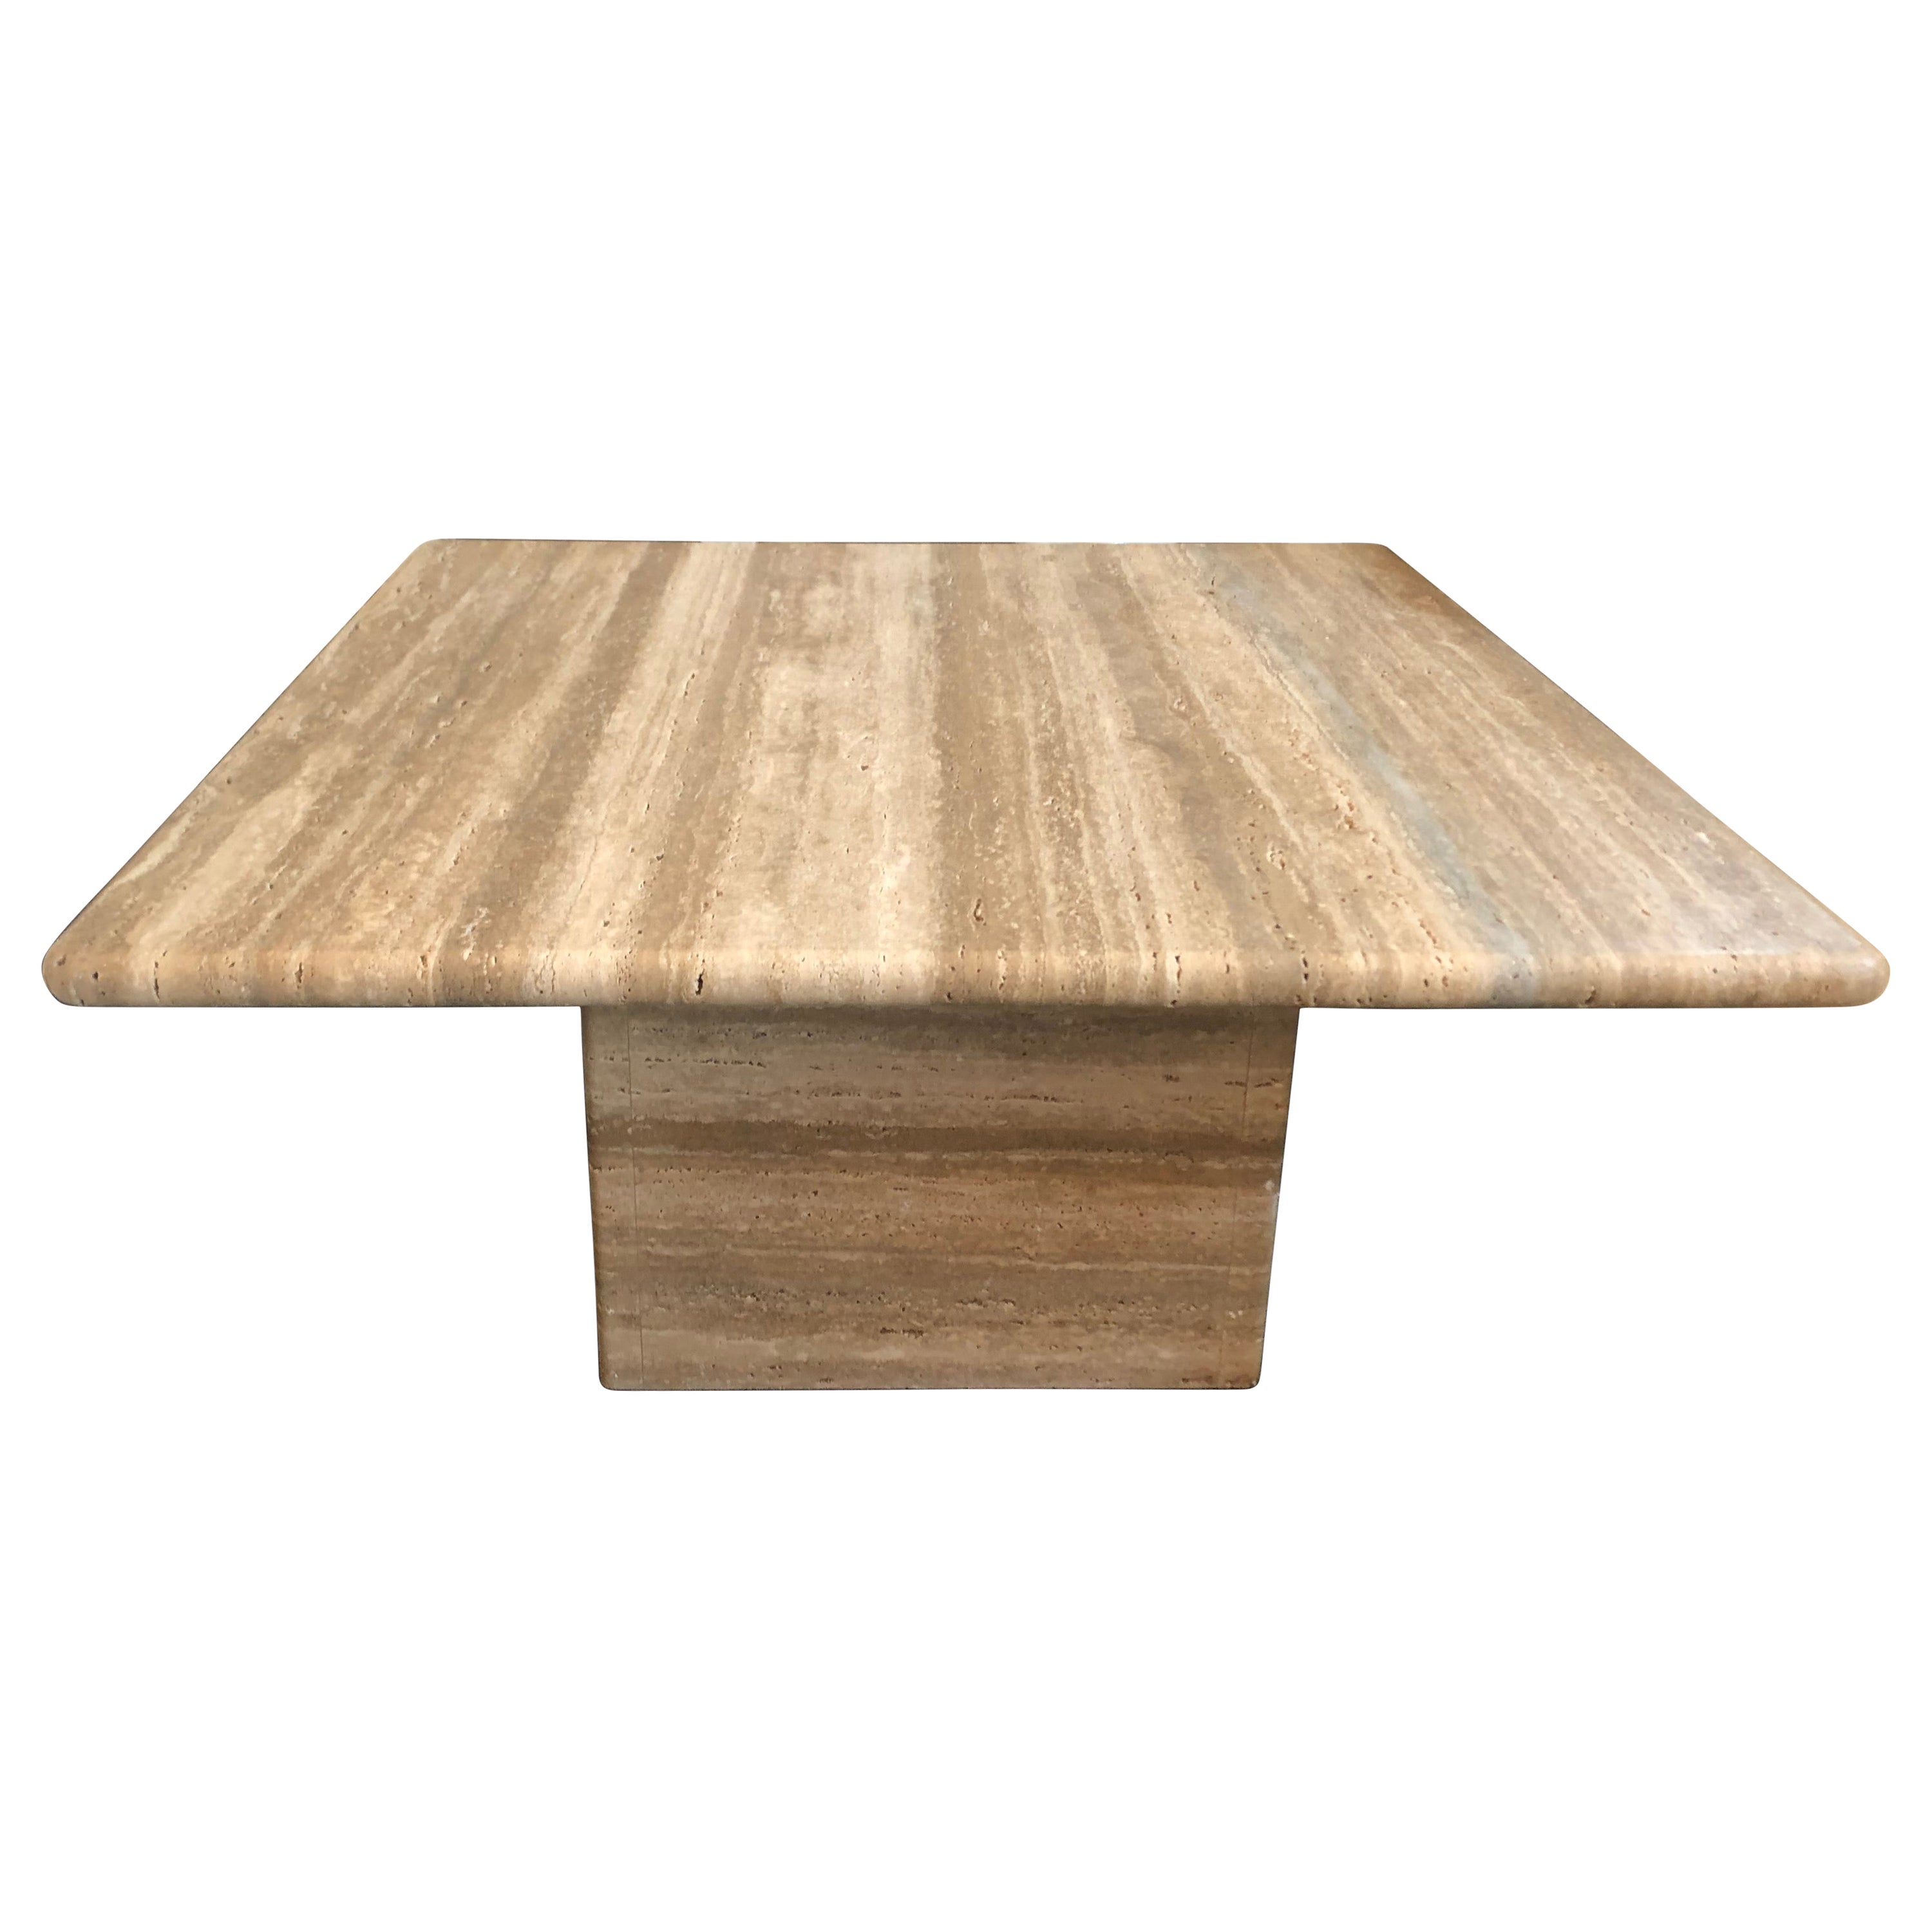 Italian Square Travertine Marble table by Le Lampade